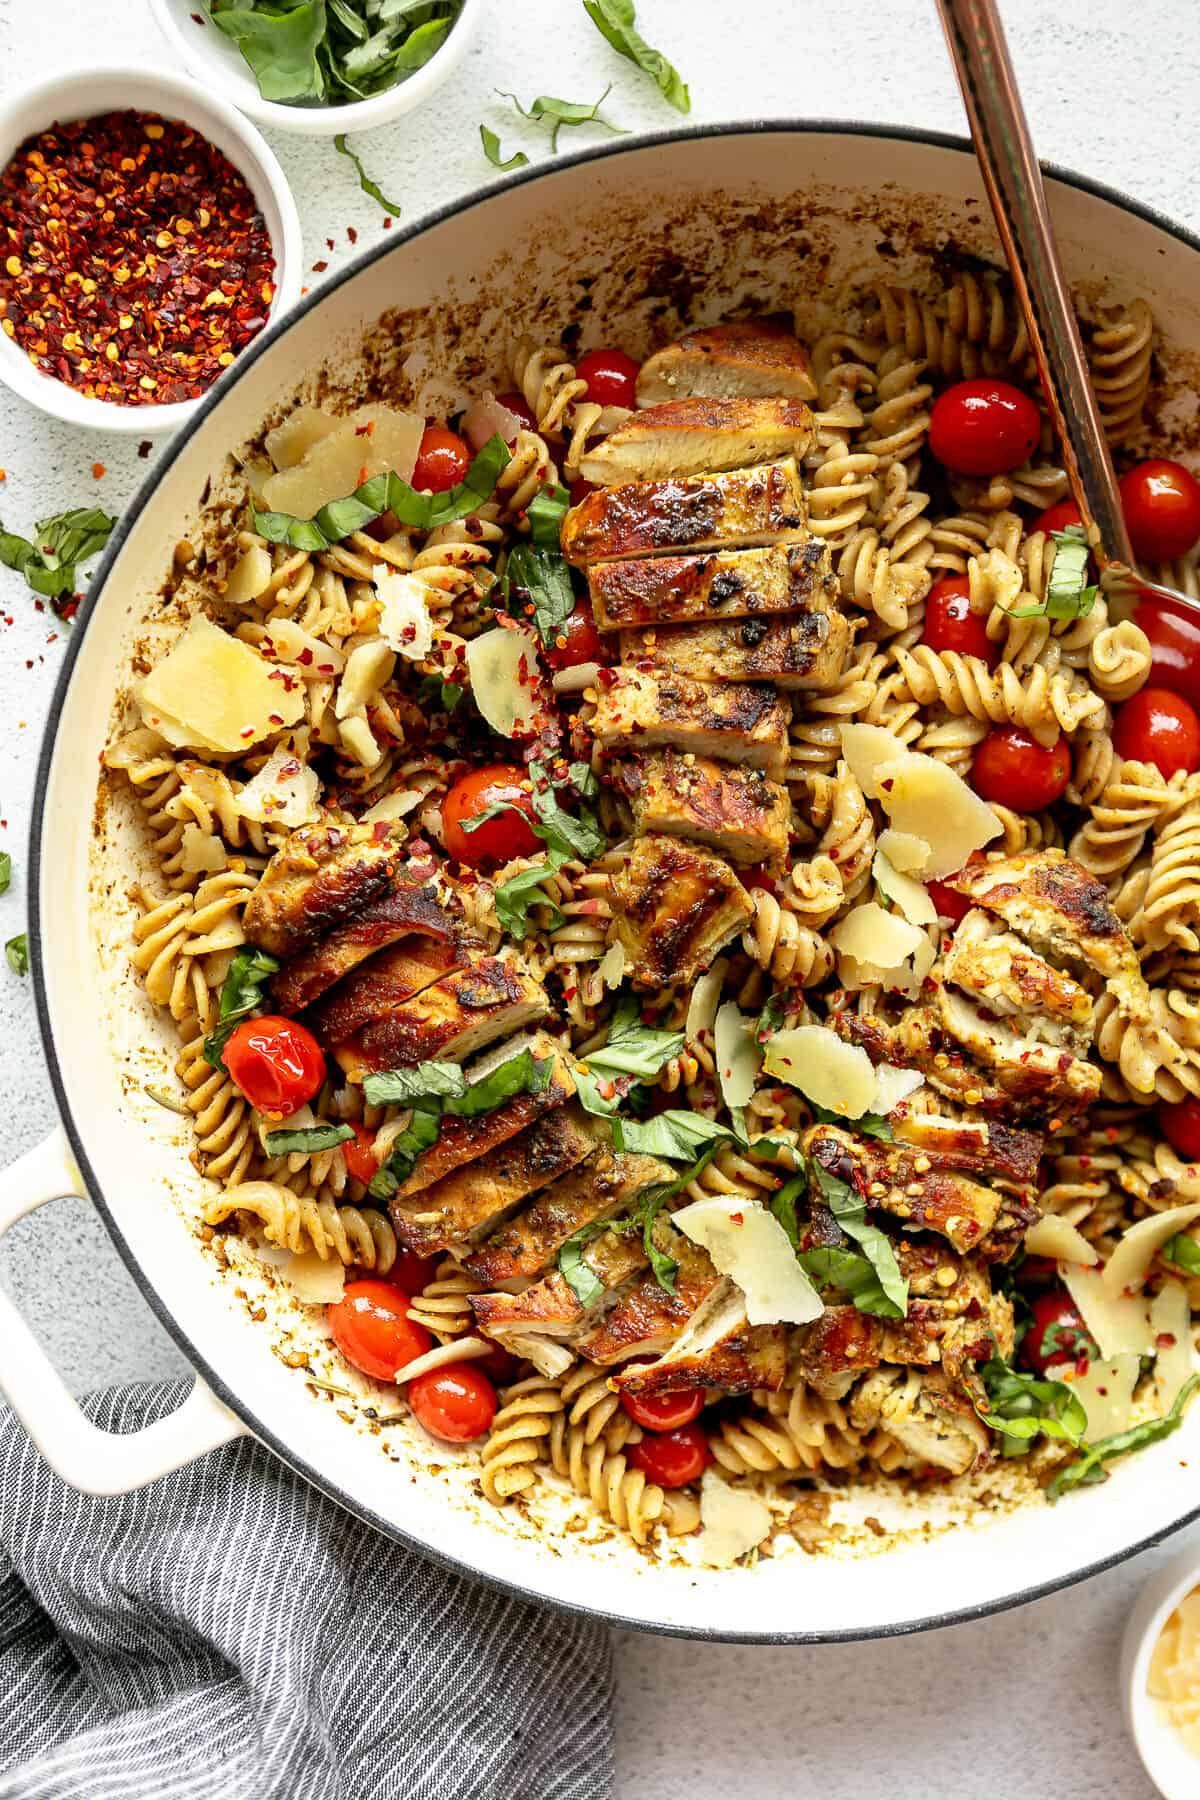 Large white pot filled with pesto pasta and grilled chicken garnished with basil.